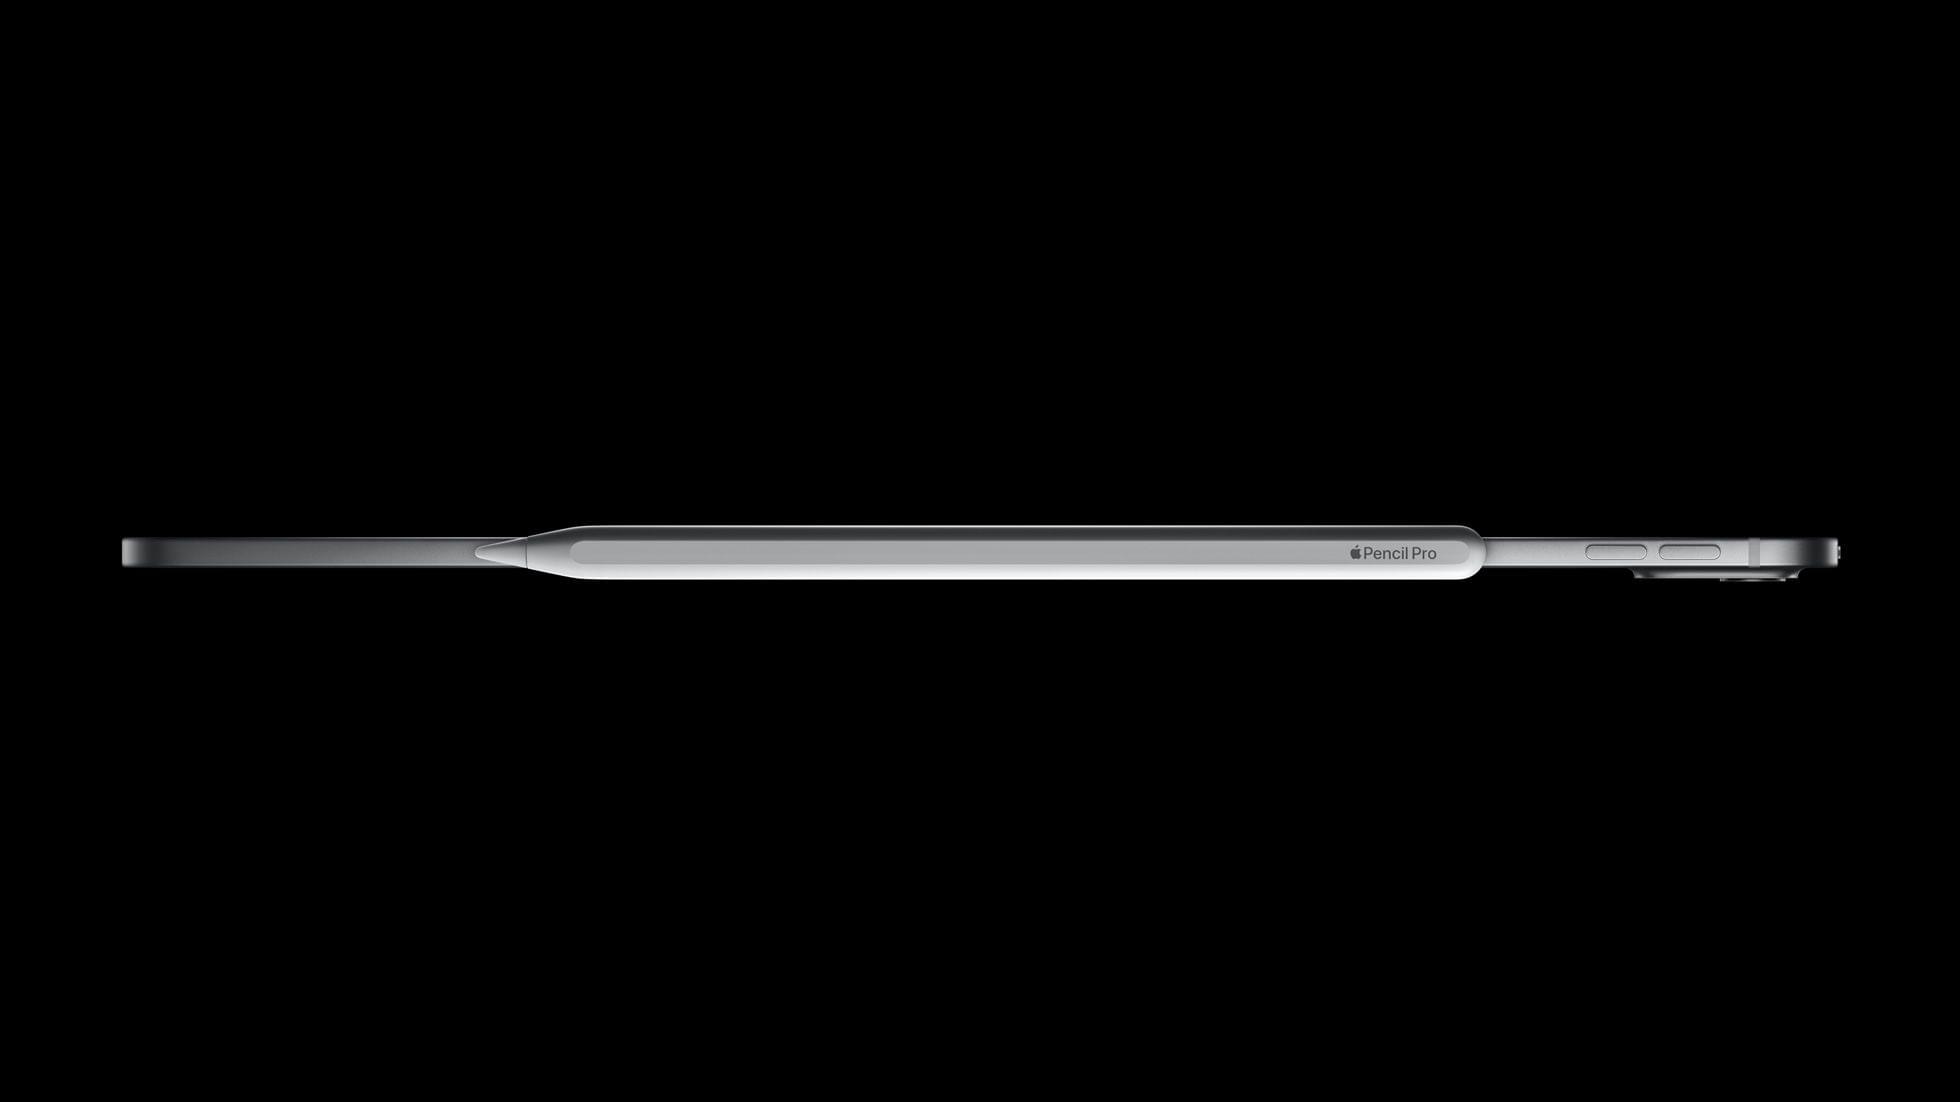 Apple Reveals New Keyboards and the Apple Pencil Pro